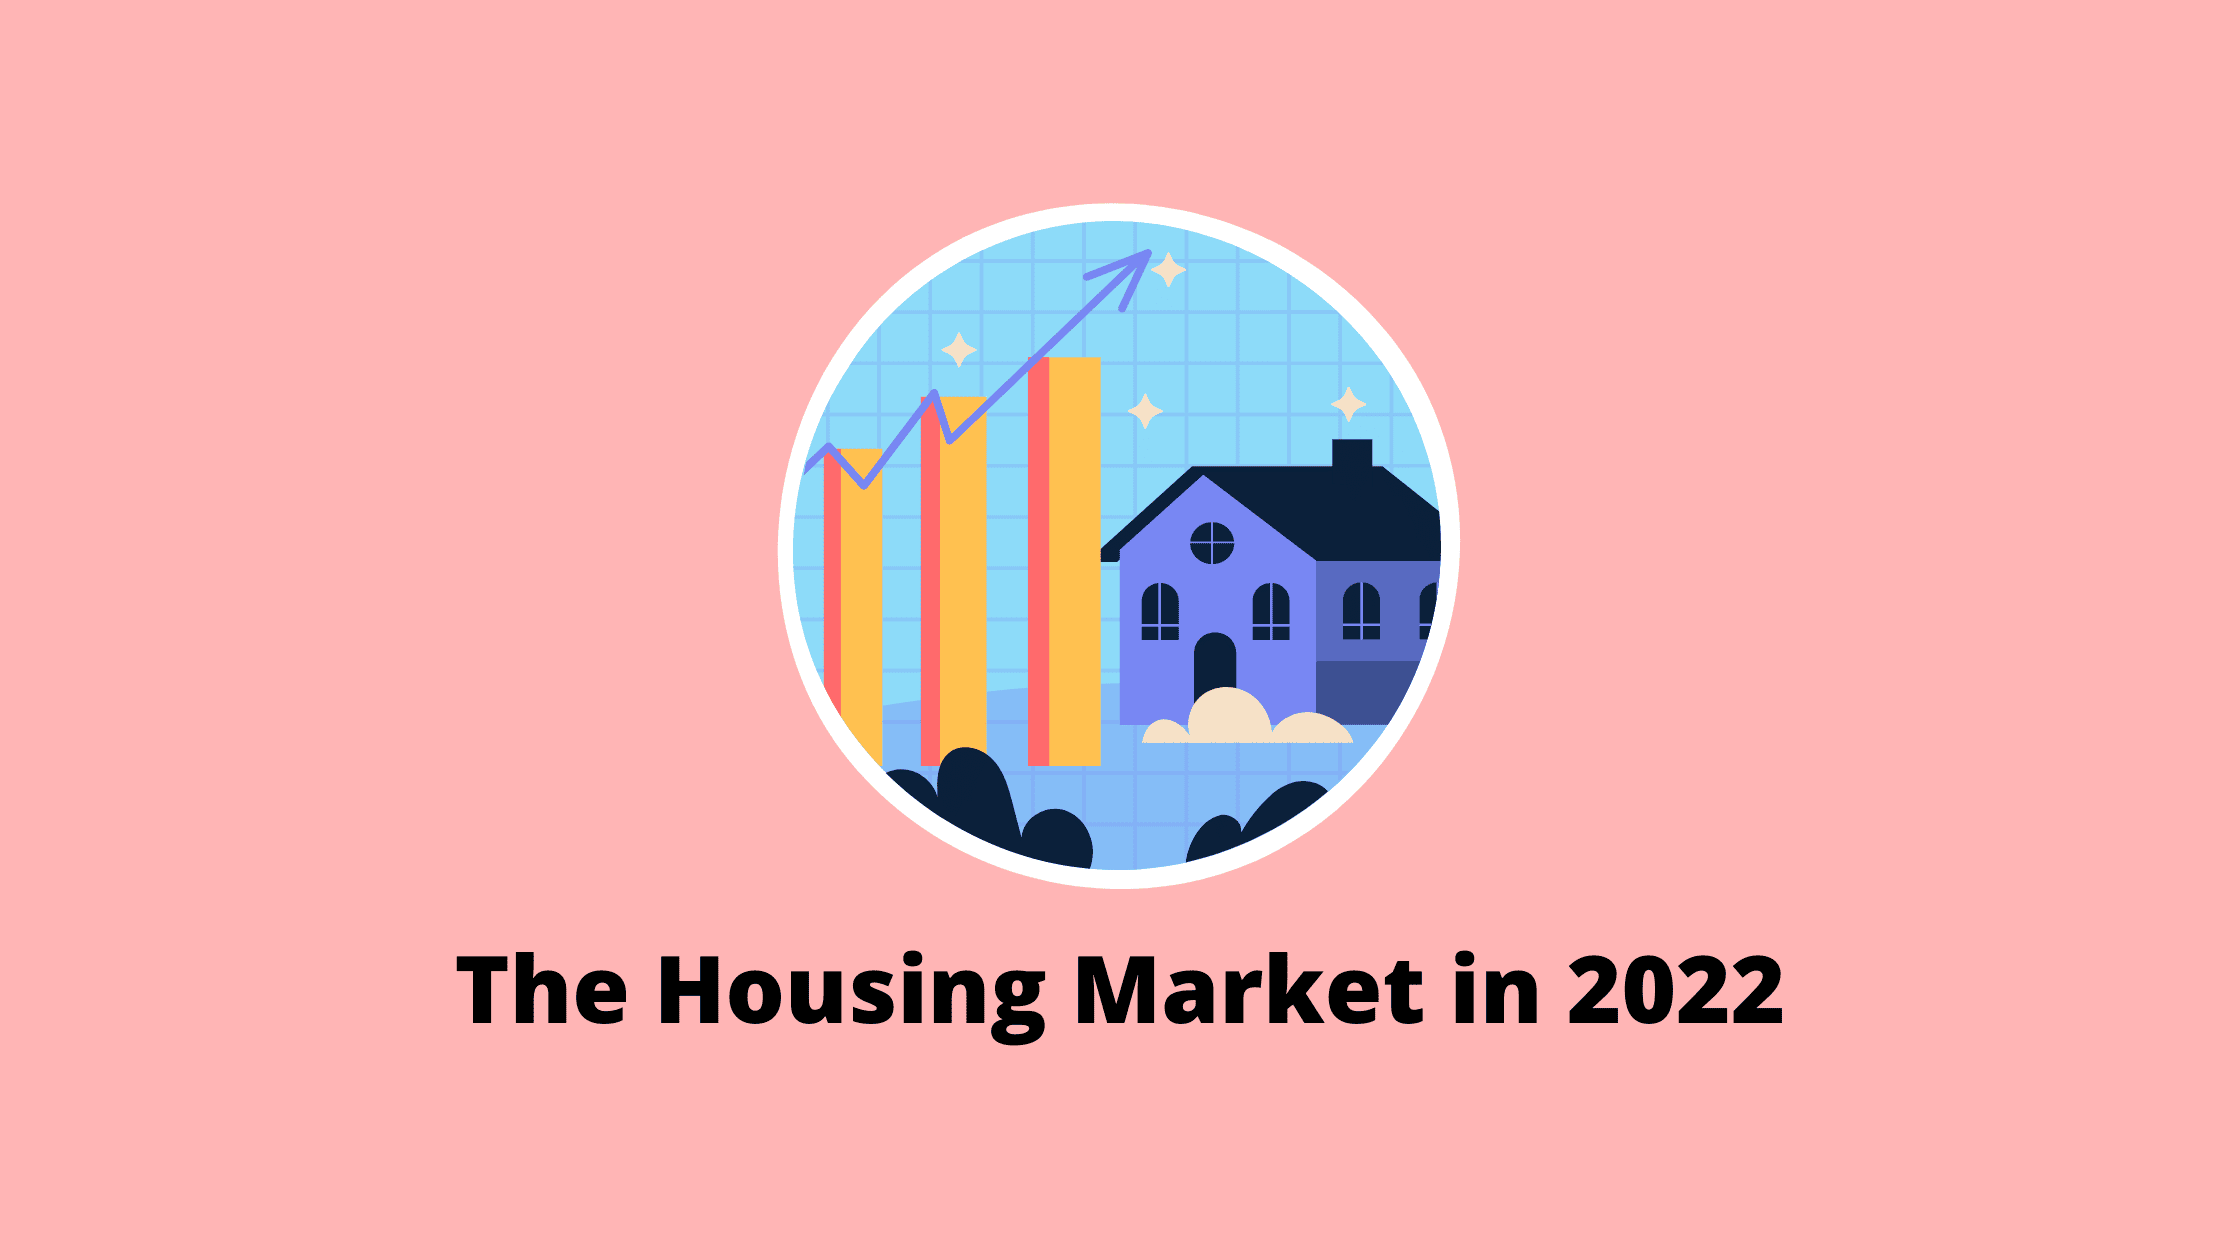 The Housing Market in 2022: The Latest Trend!